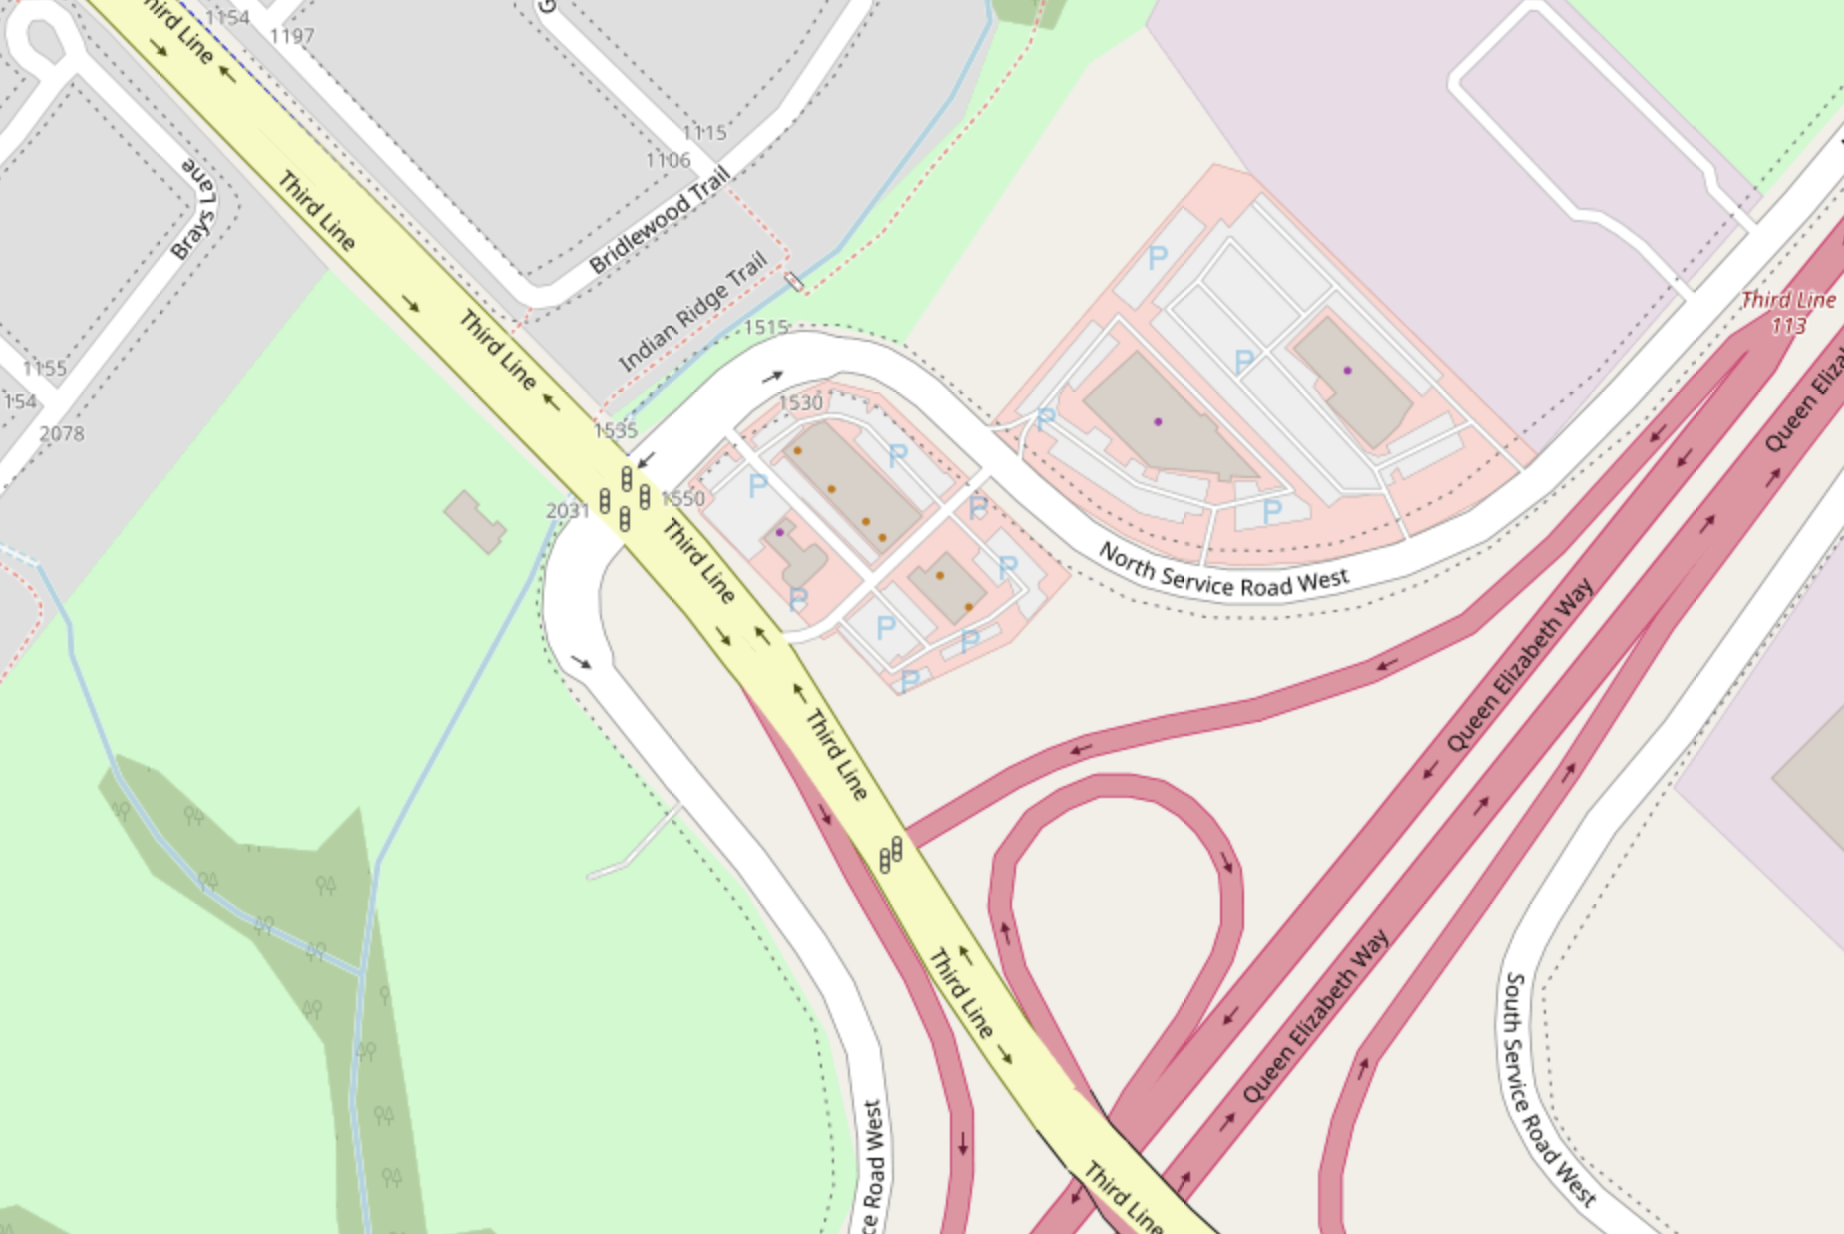 North Service Rd W & Third Line | Openstreetmap